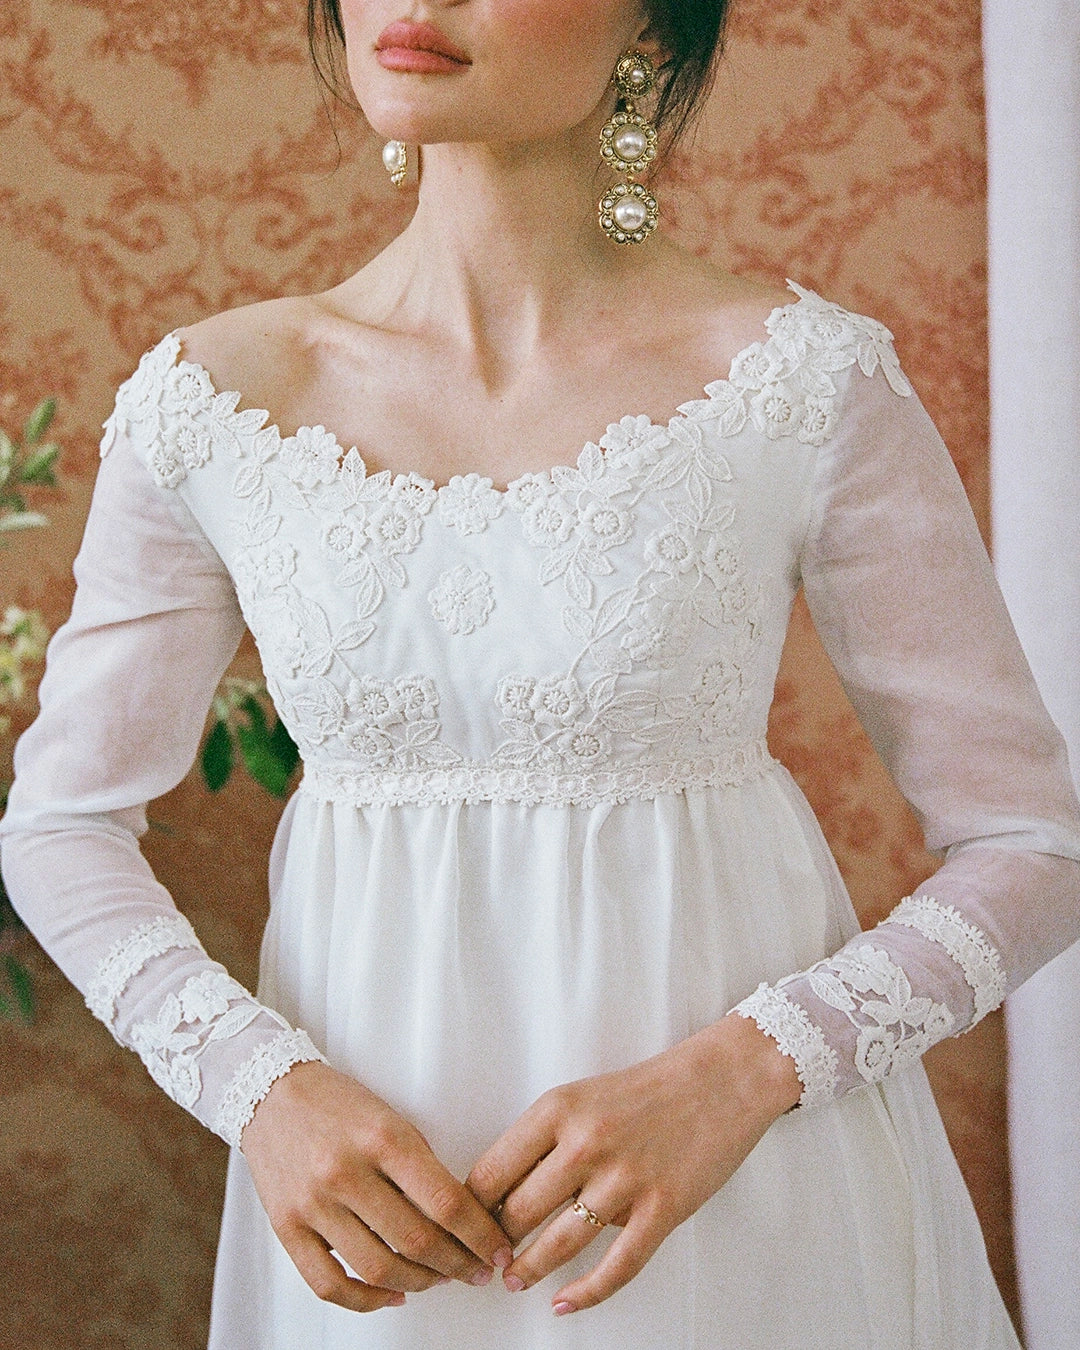 1960s Empire Waist Regency-Style Bridal Gown With Crochet Lace Appliqué And Train